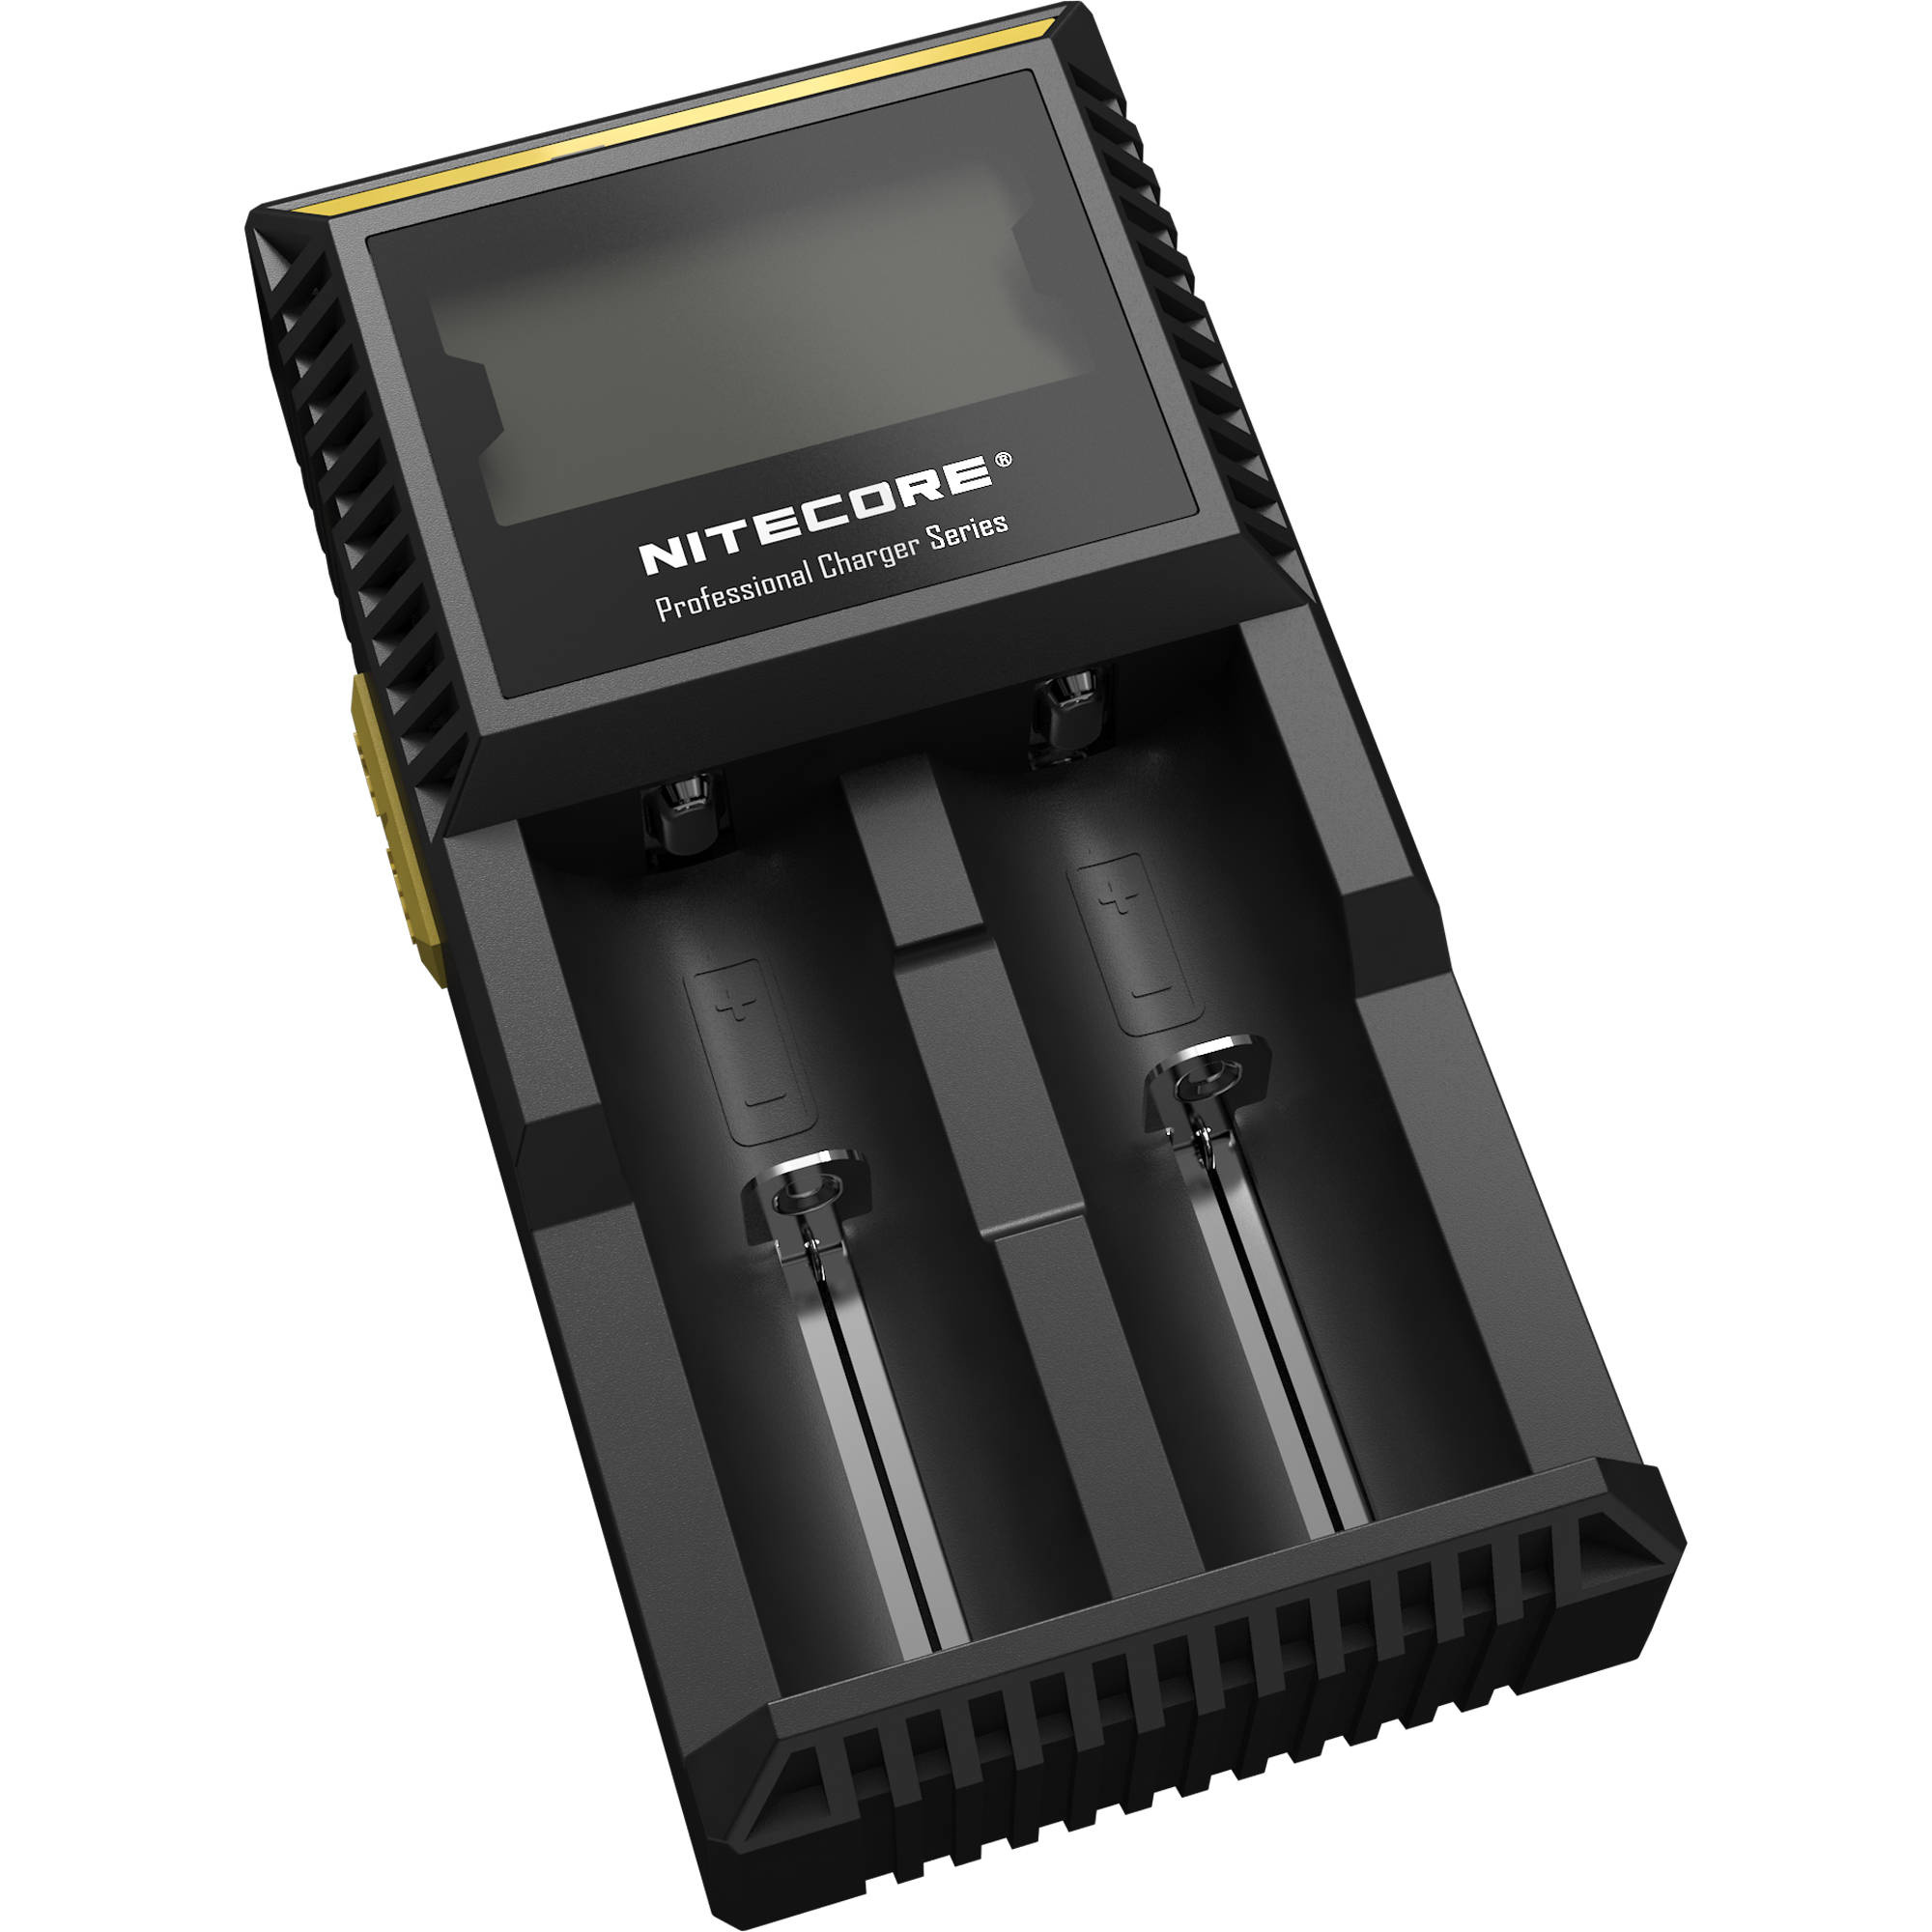 NITECORE Digicharger D2 Universal Battery Charger